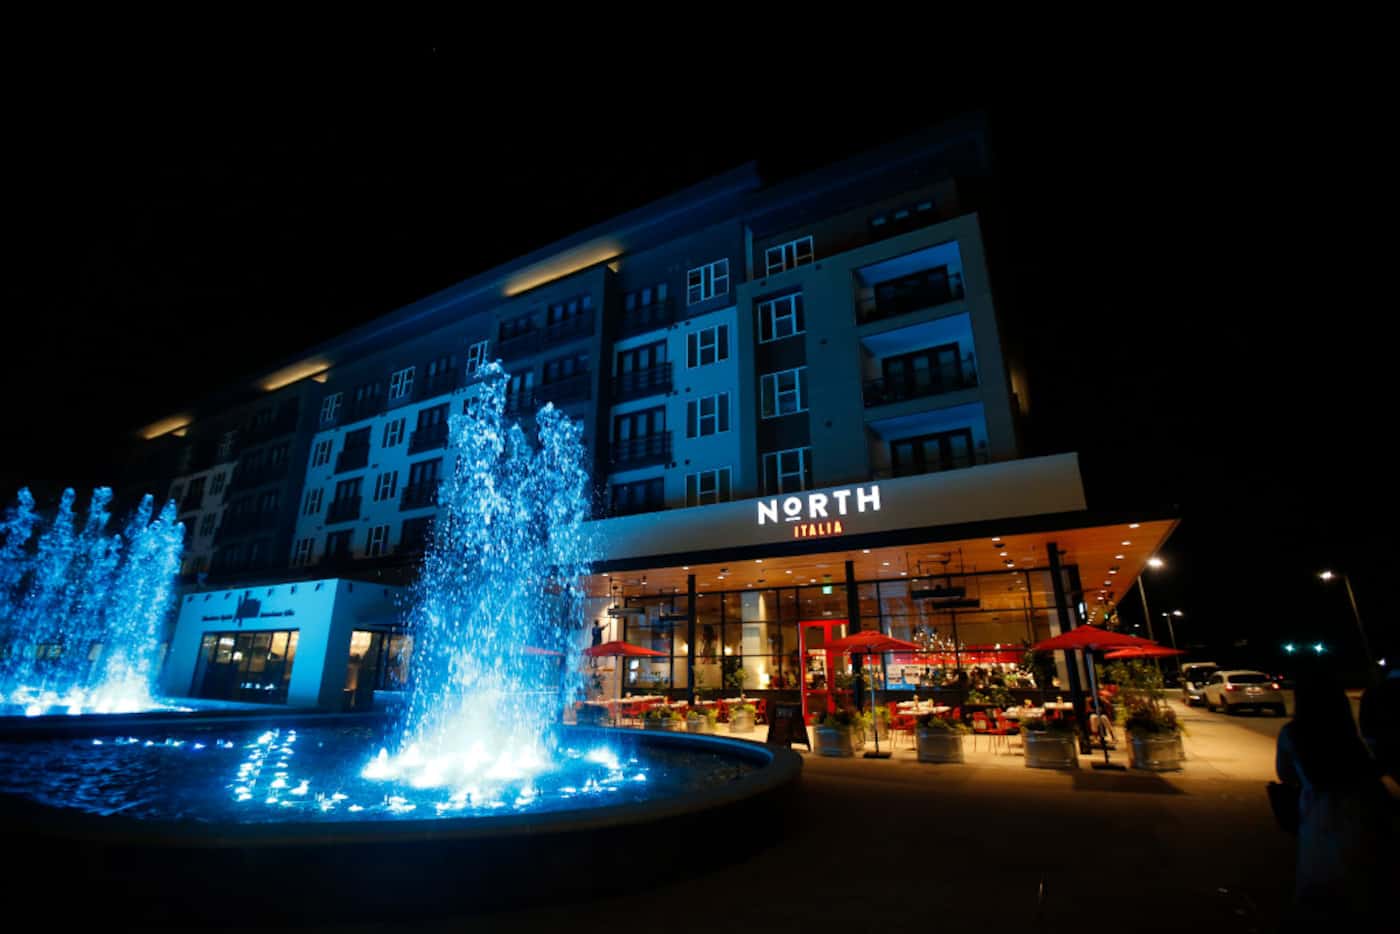 Fountains in front of North Italia, a new restaurant at Legacy West, in Plano, Texas,...